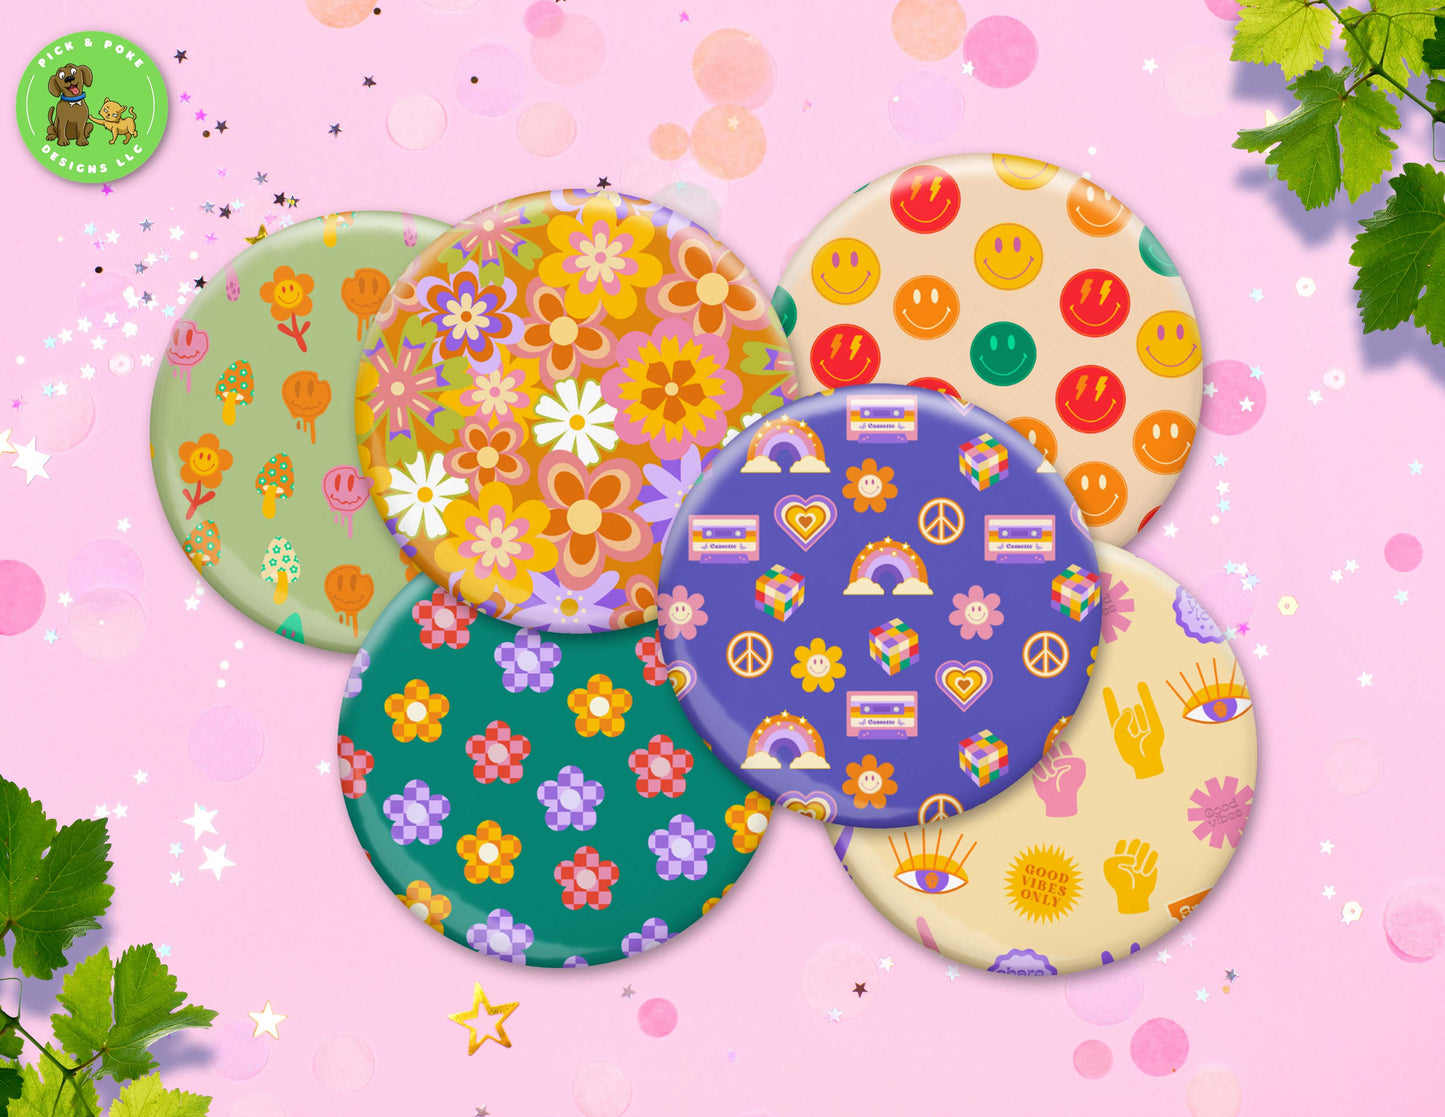 Fun Retro Hippie Inspired Patterns | Pinback Button, Key Chain, Magnet, Bottle Opener, or Mirror | 2.25-inch Size | Made to Order